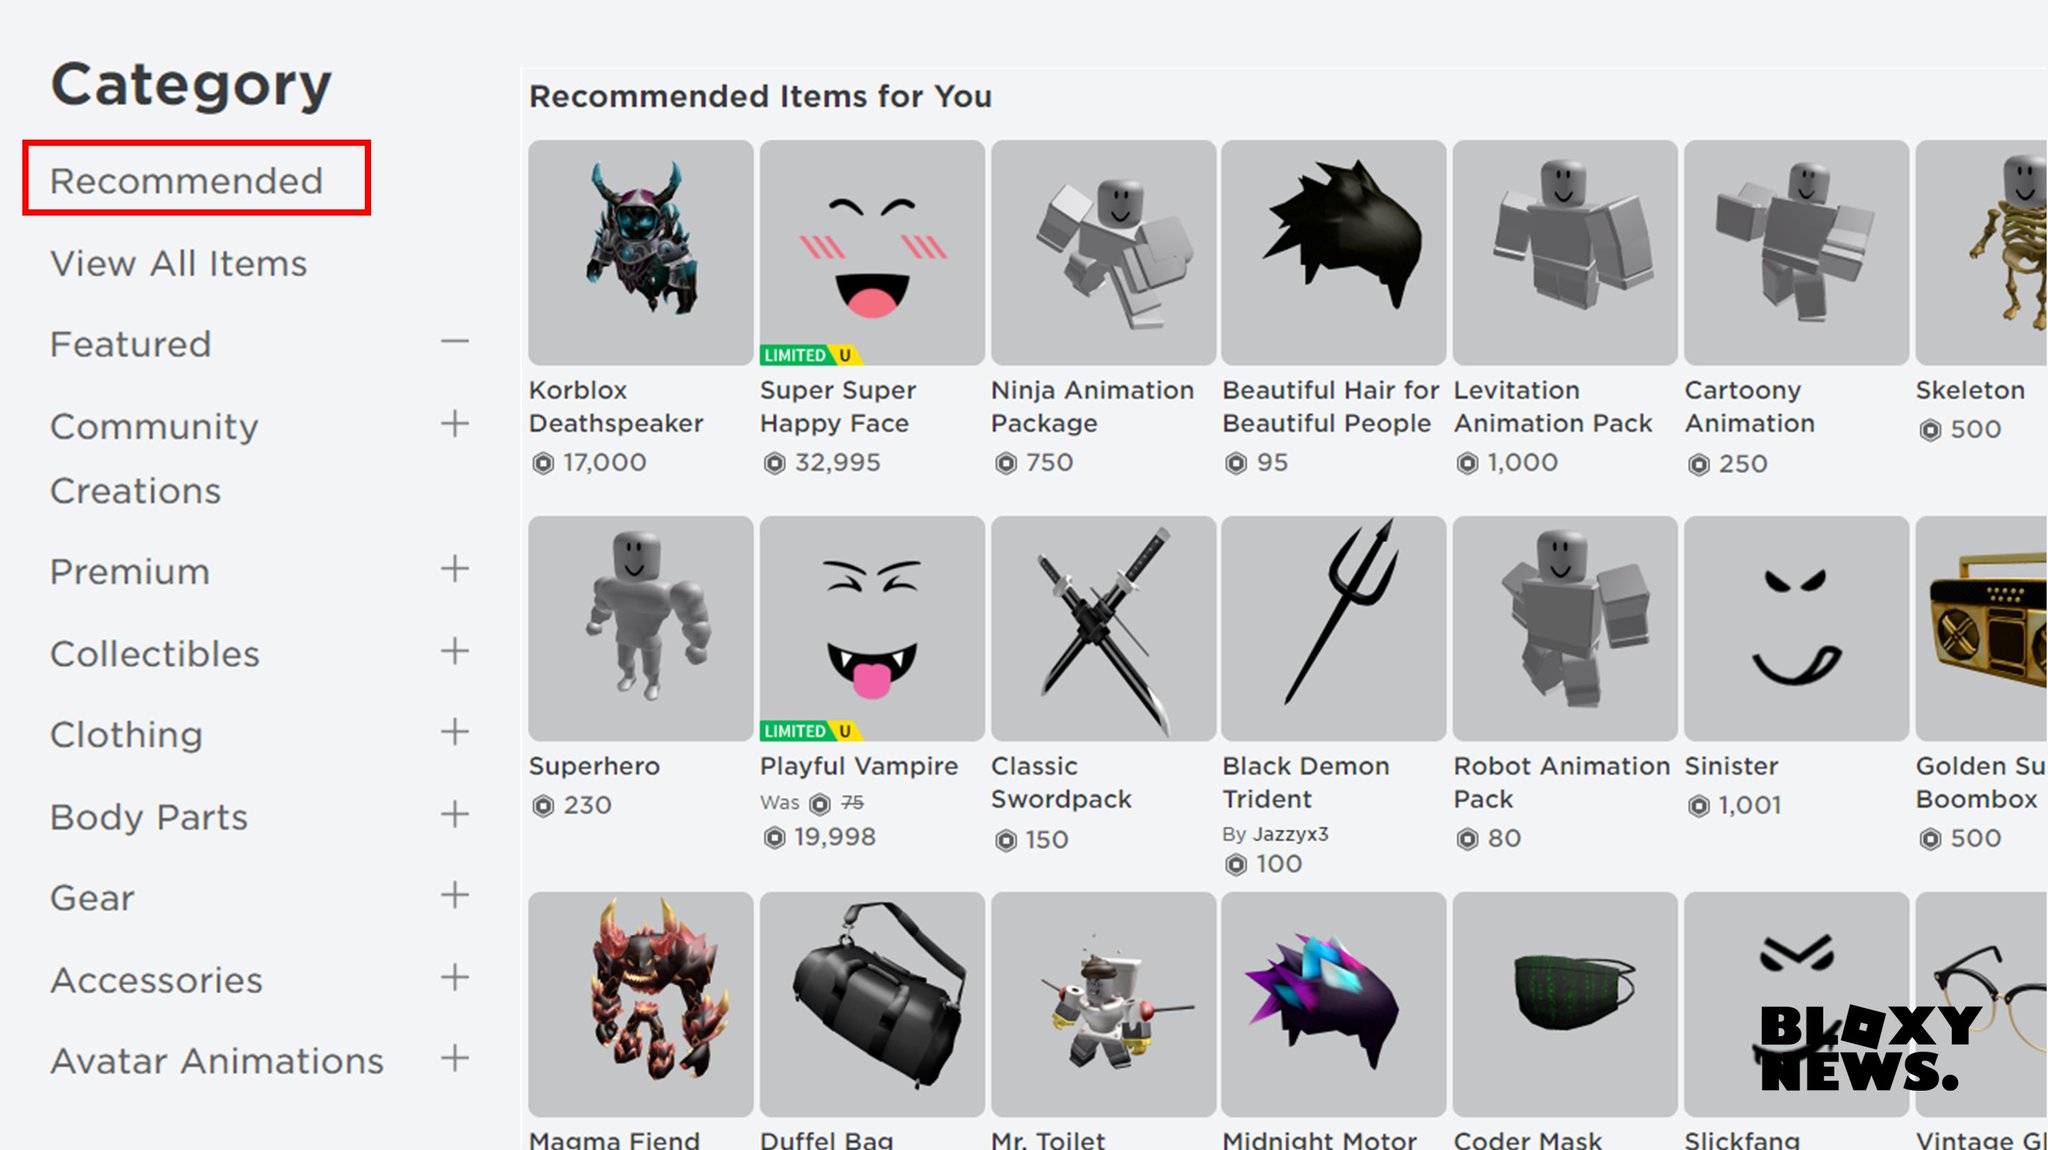 Category:Items removed from the avatar shop, Roblox Wiki